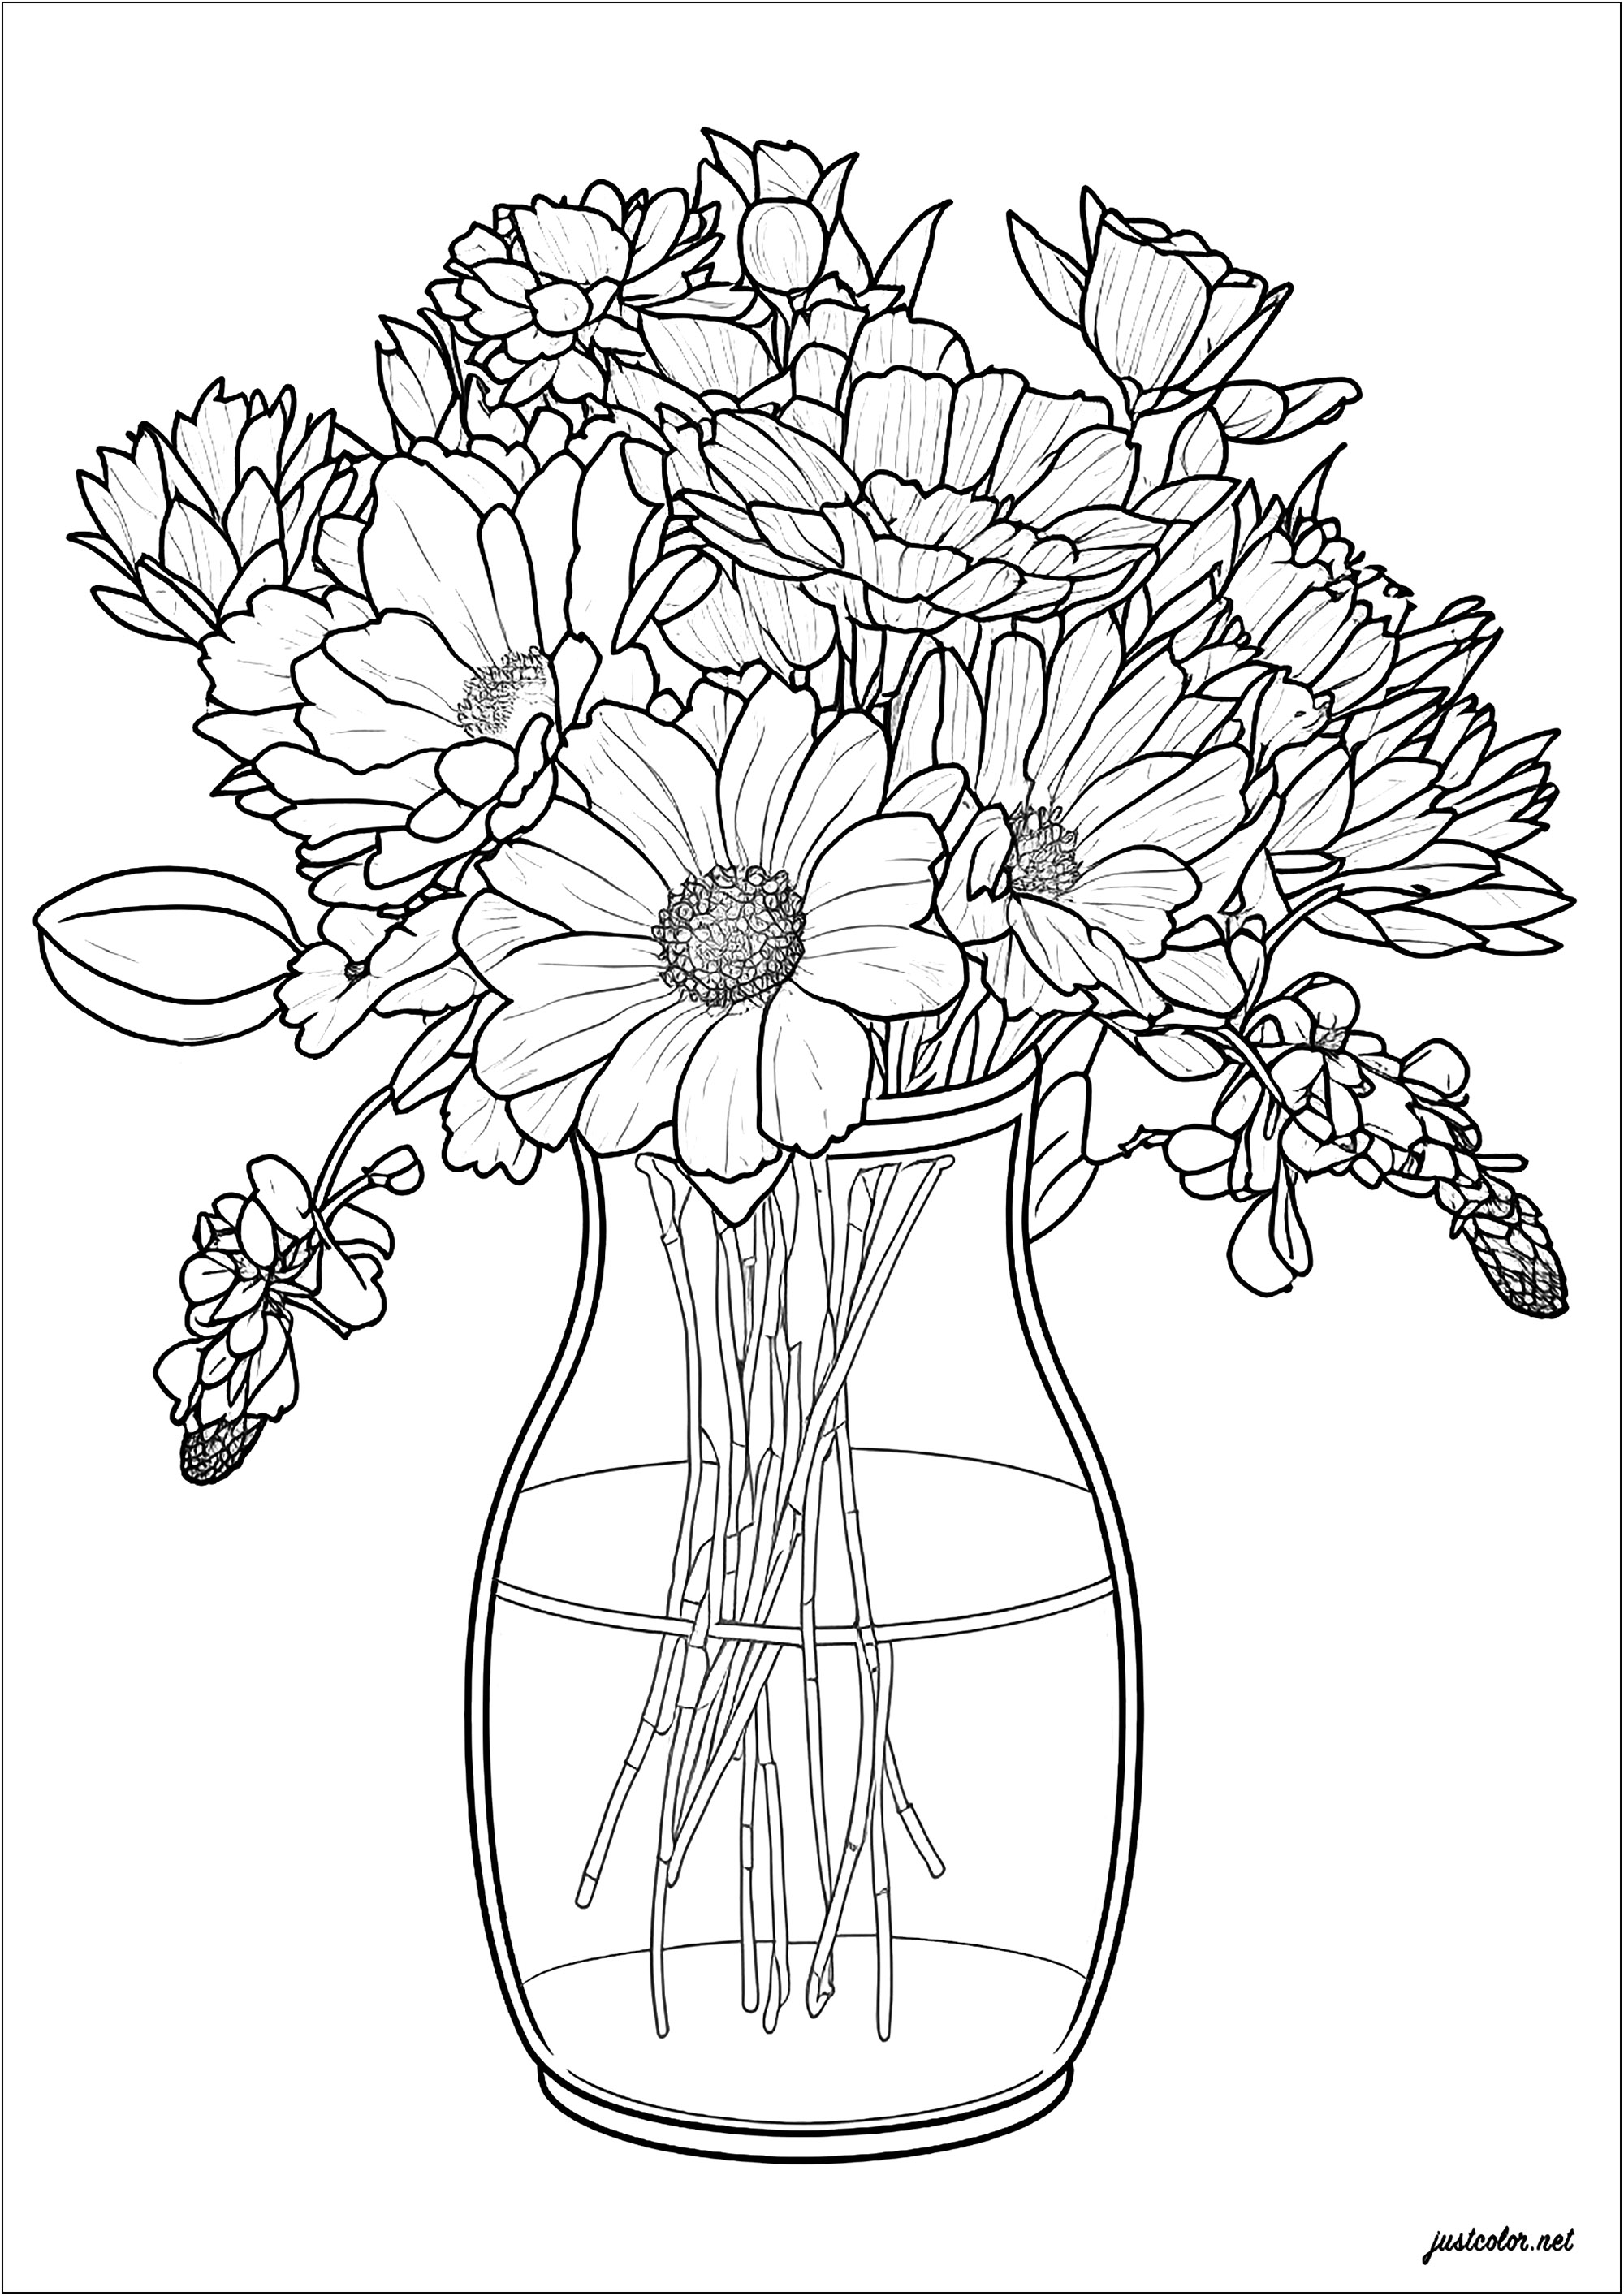 Vase and delicate flowers. A beautiful design with fine lines, representing beautiful flowers elegantly distributed in a glass vase. A great way to have a great time creating something unique and beautiful.